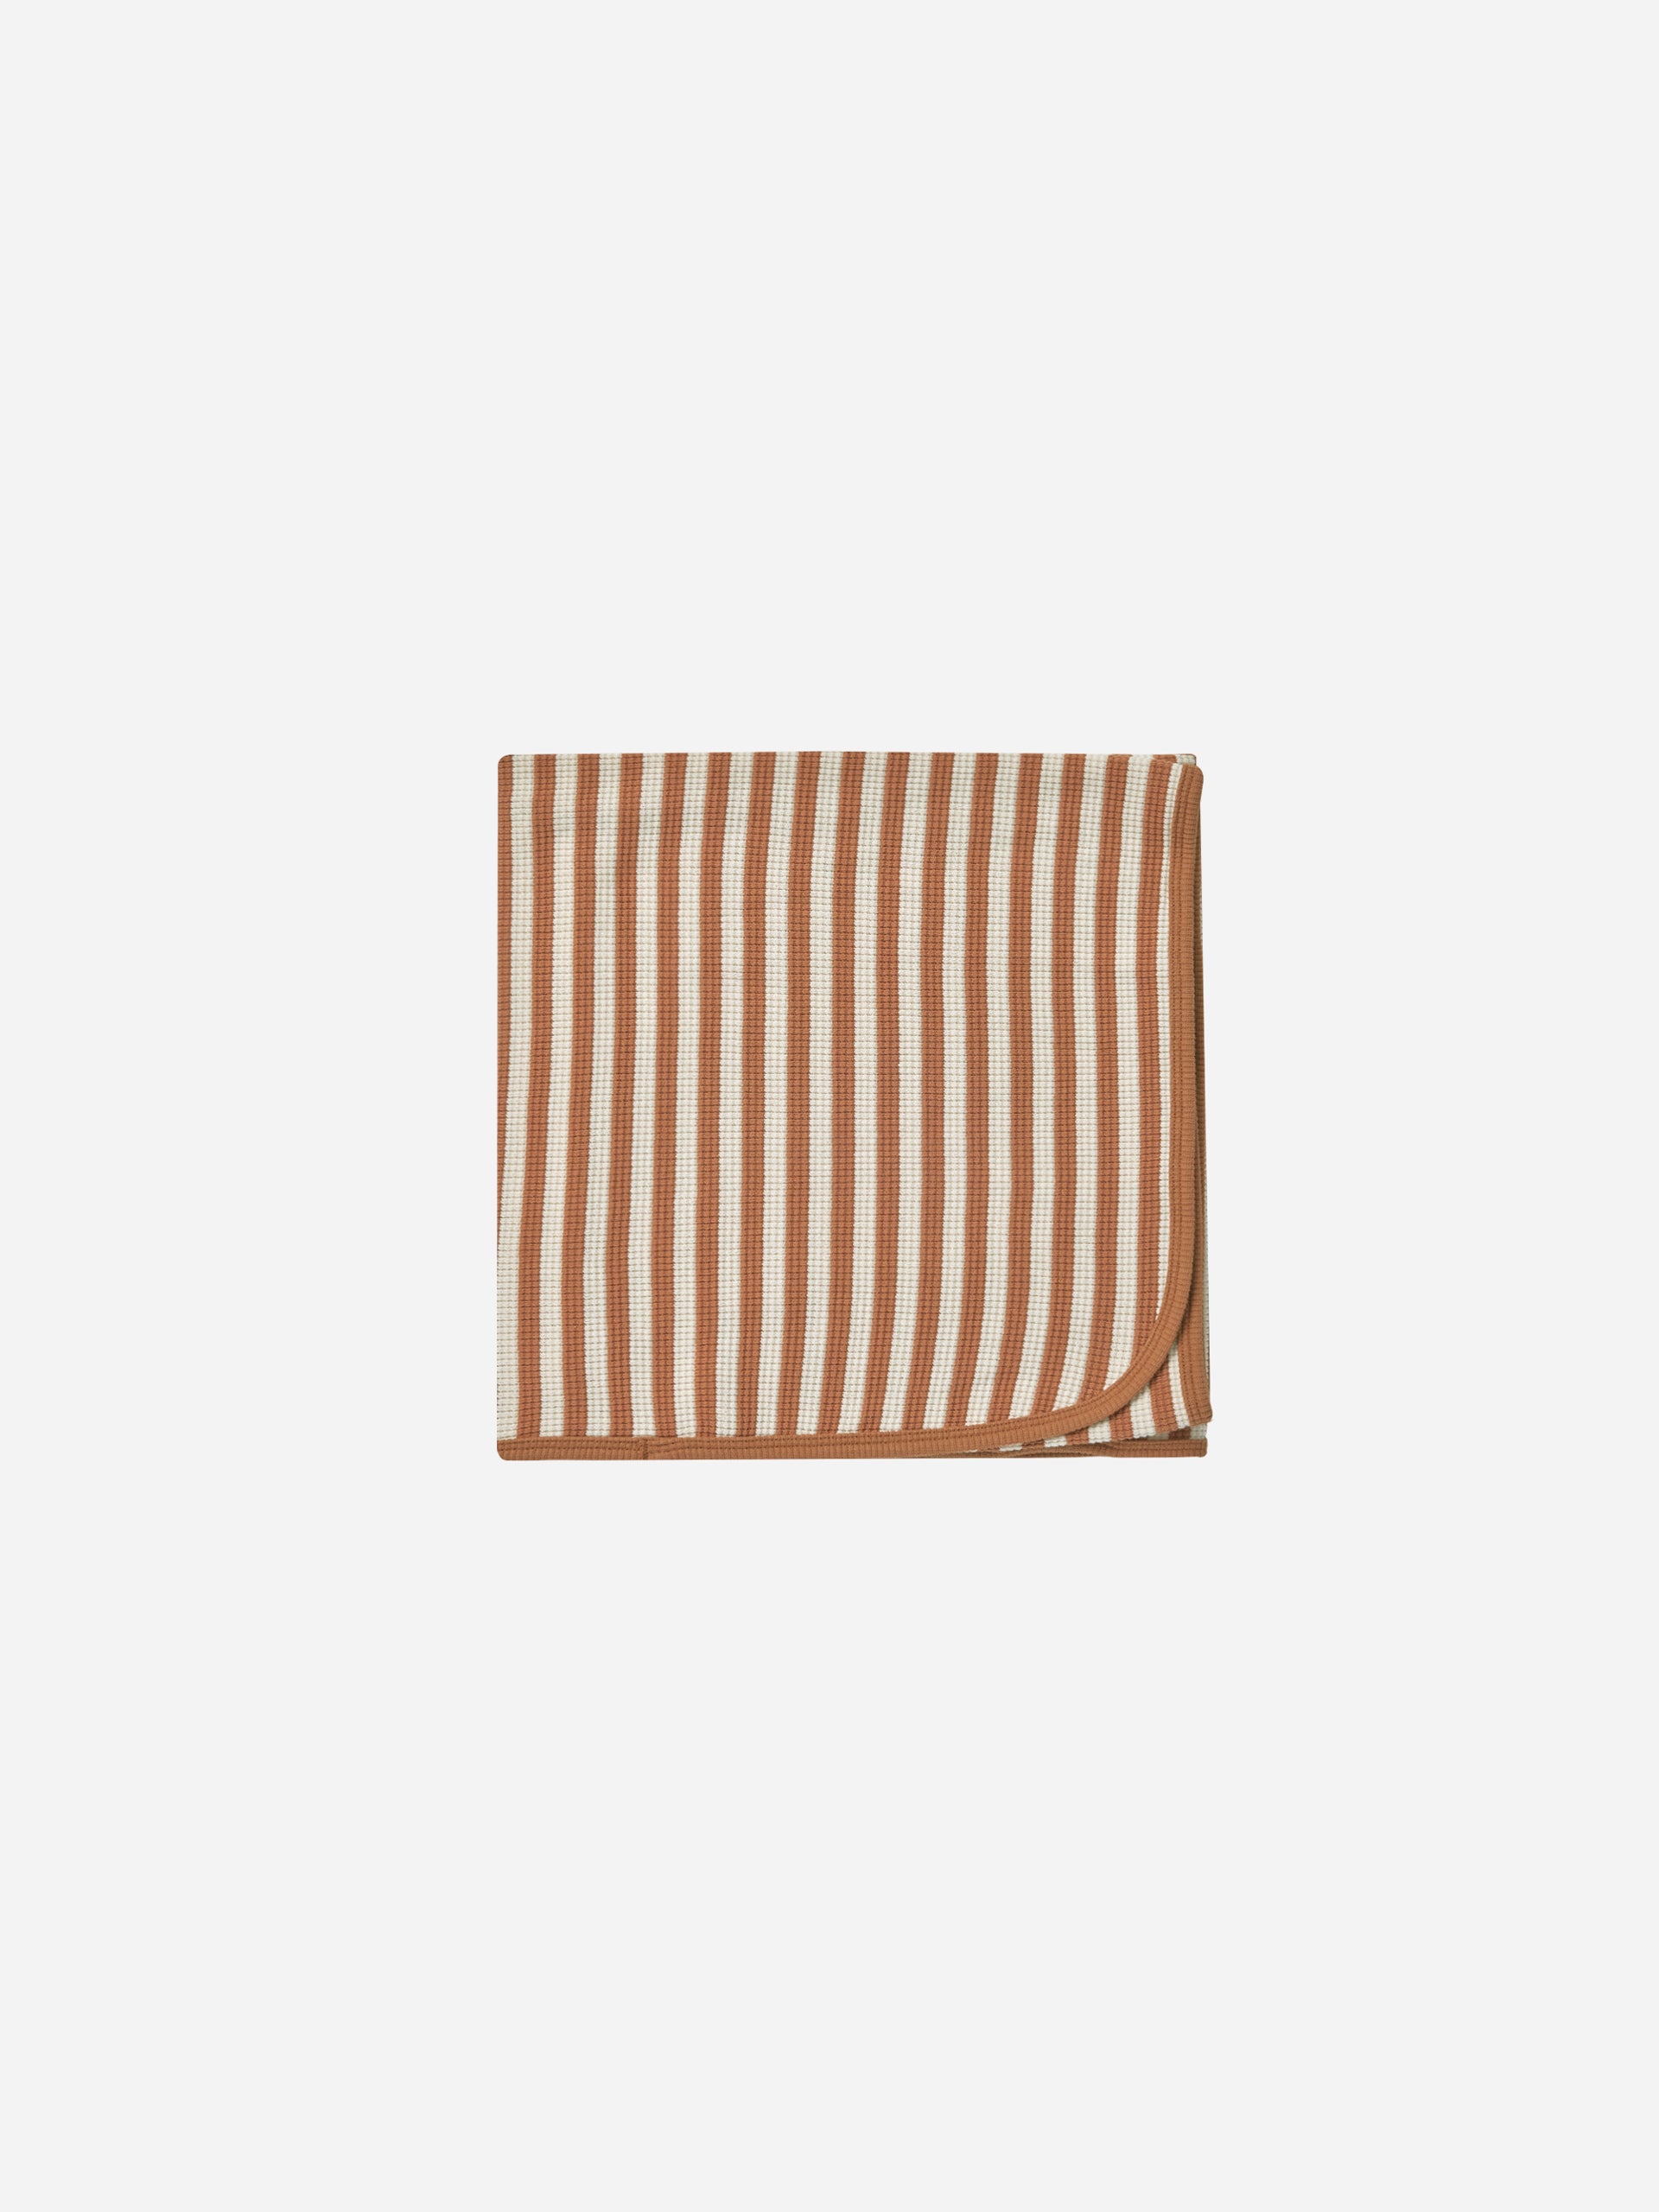 Baby Blanket || Clay Stripe - Rylee + Cru | Kids Clothes | Trendy Baby Clothes | Modern Infant Outfits |